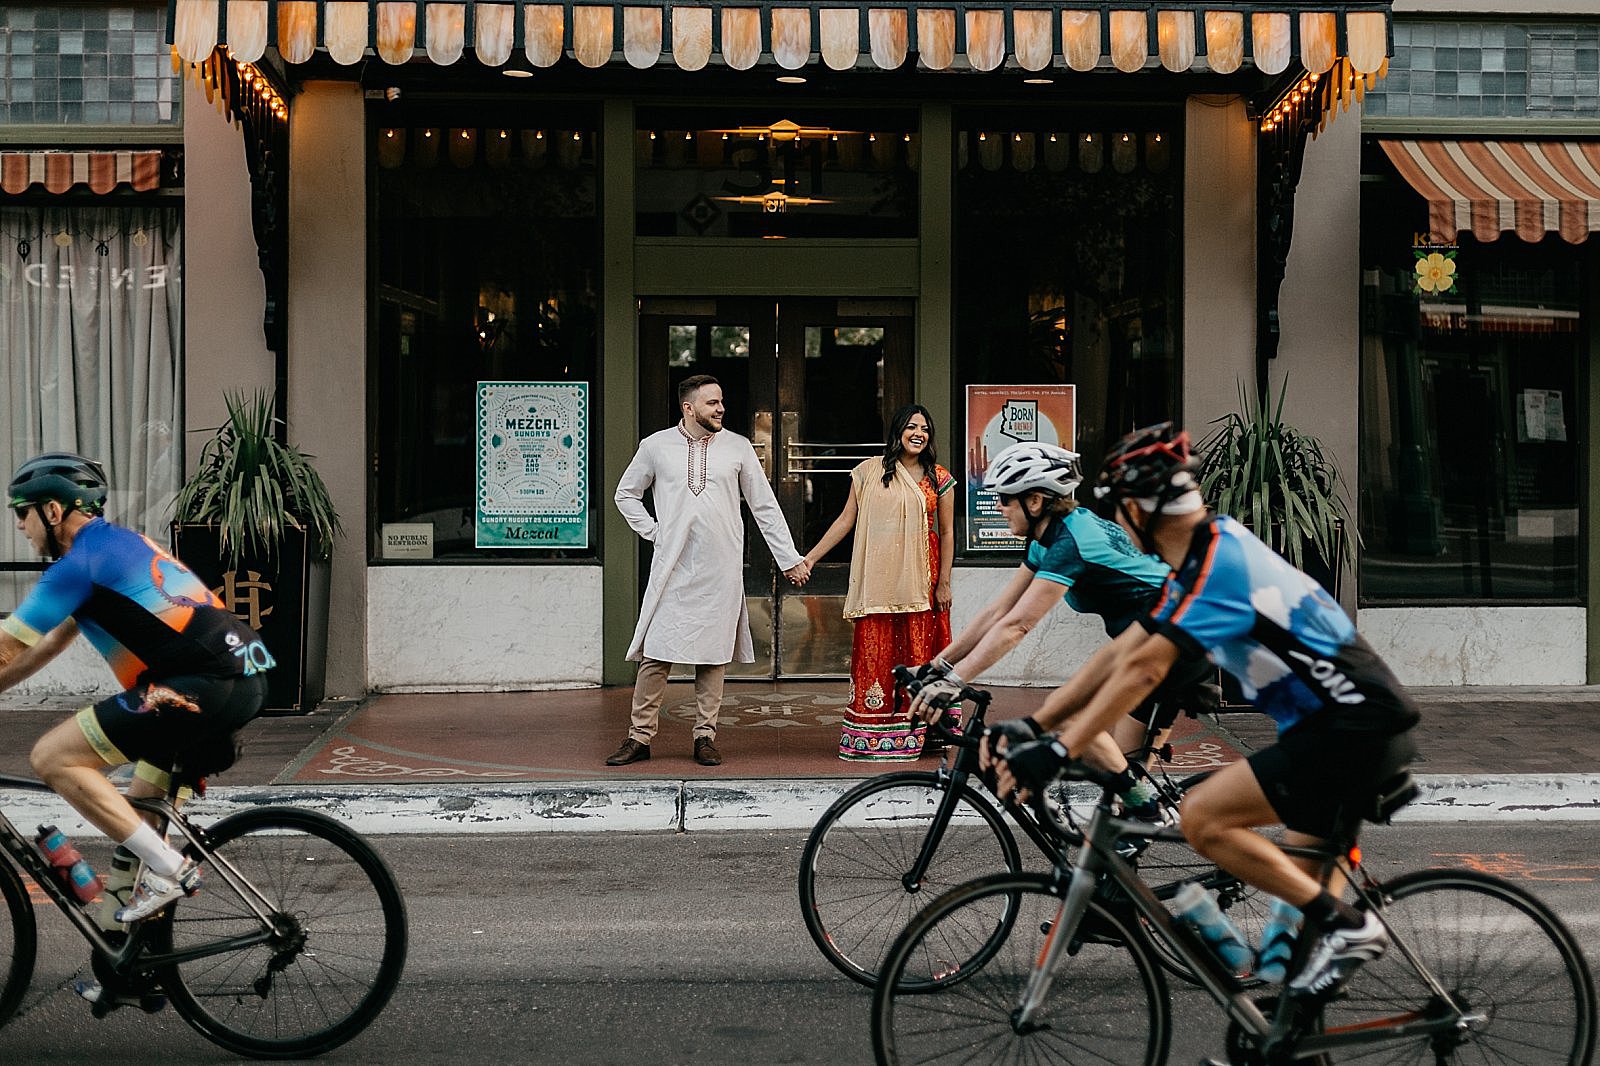 downtown tucson engagement photo hotel congress bikes passing on the street